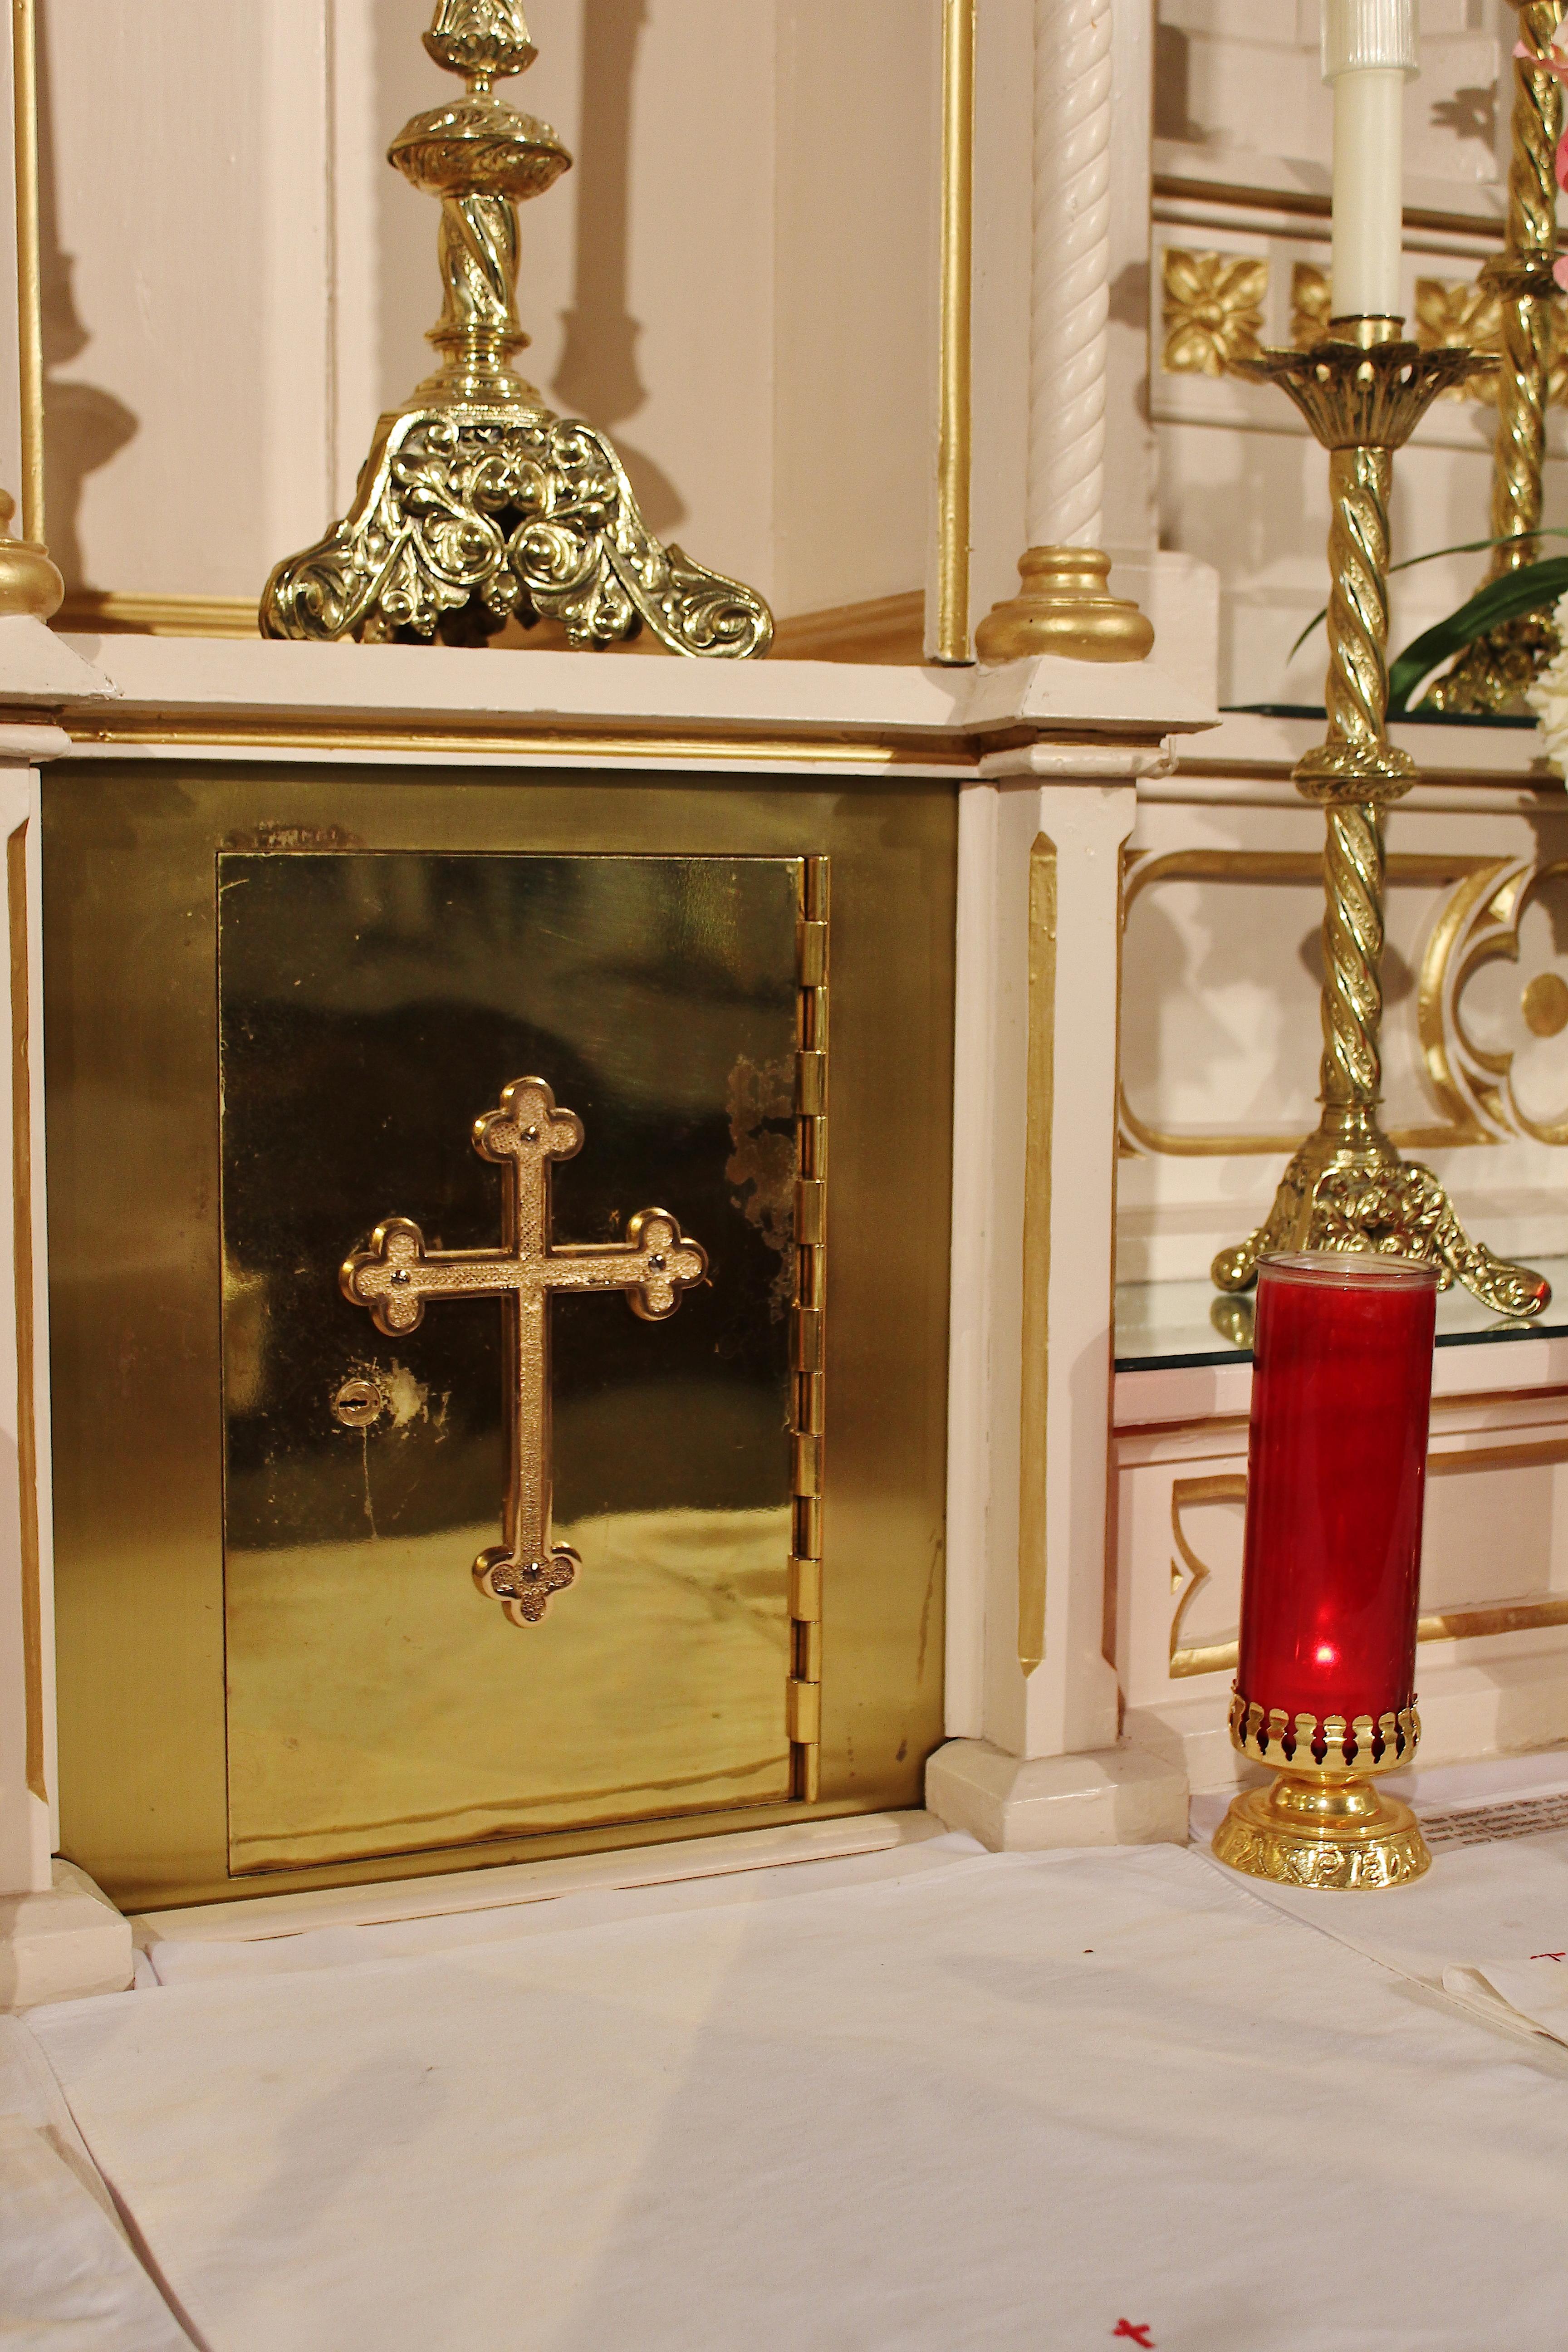 Gold Tabernacle door with a gold cross on it and a red galss candle in front